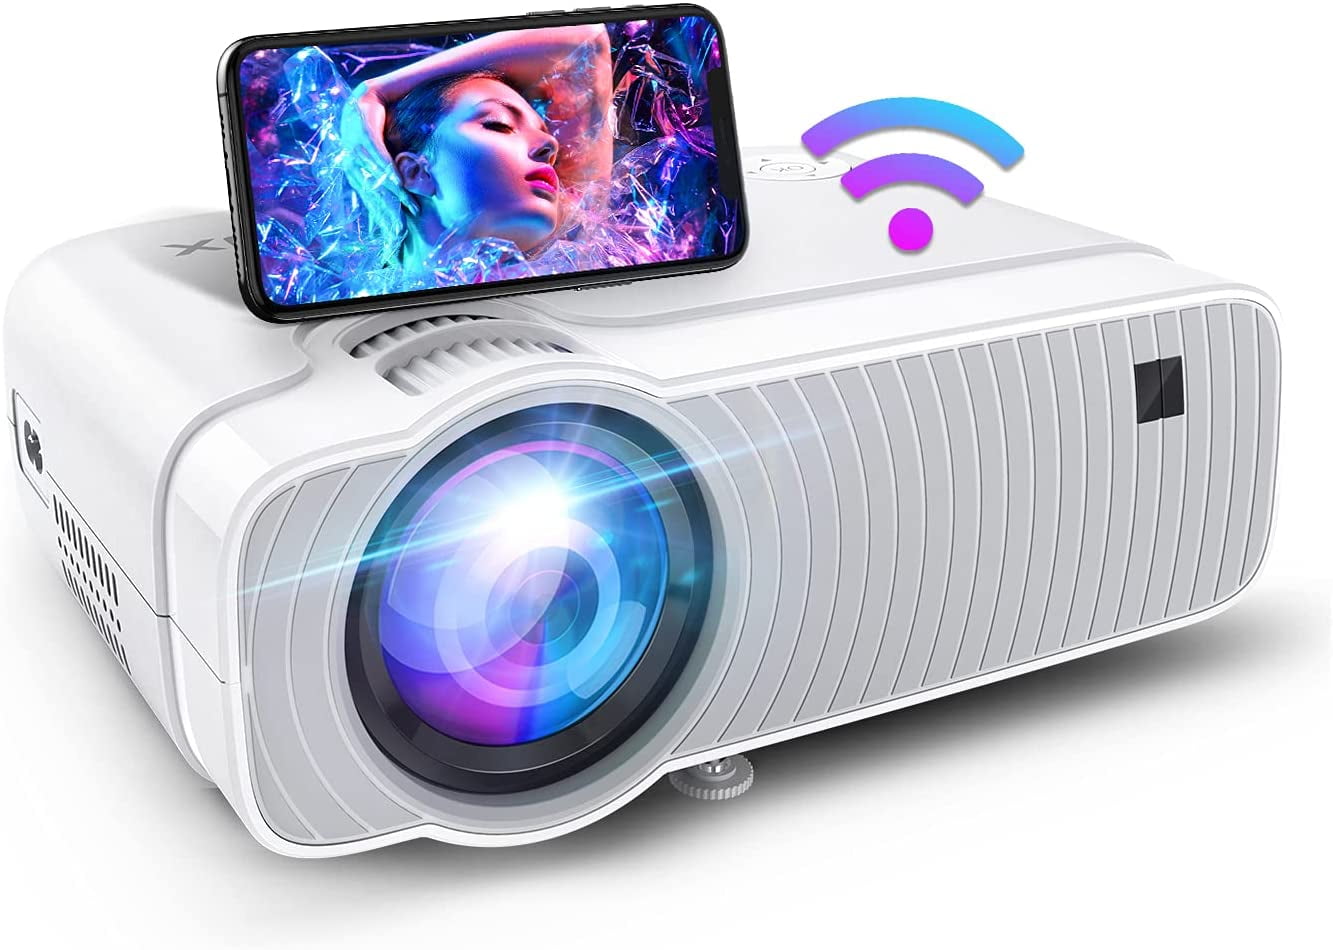 Home Smart Projector LED Portable Office WiFi Wireless Projector HD 1080P Home Portable Movie Projector